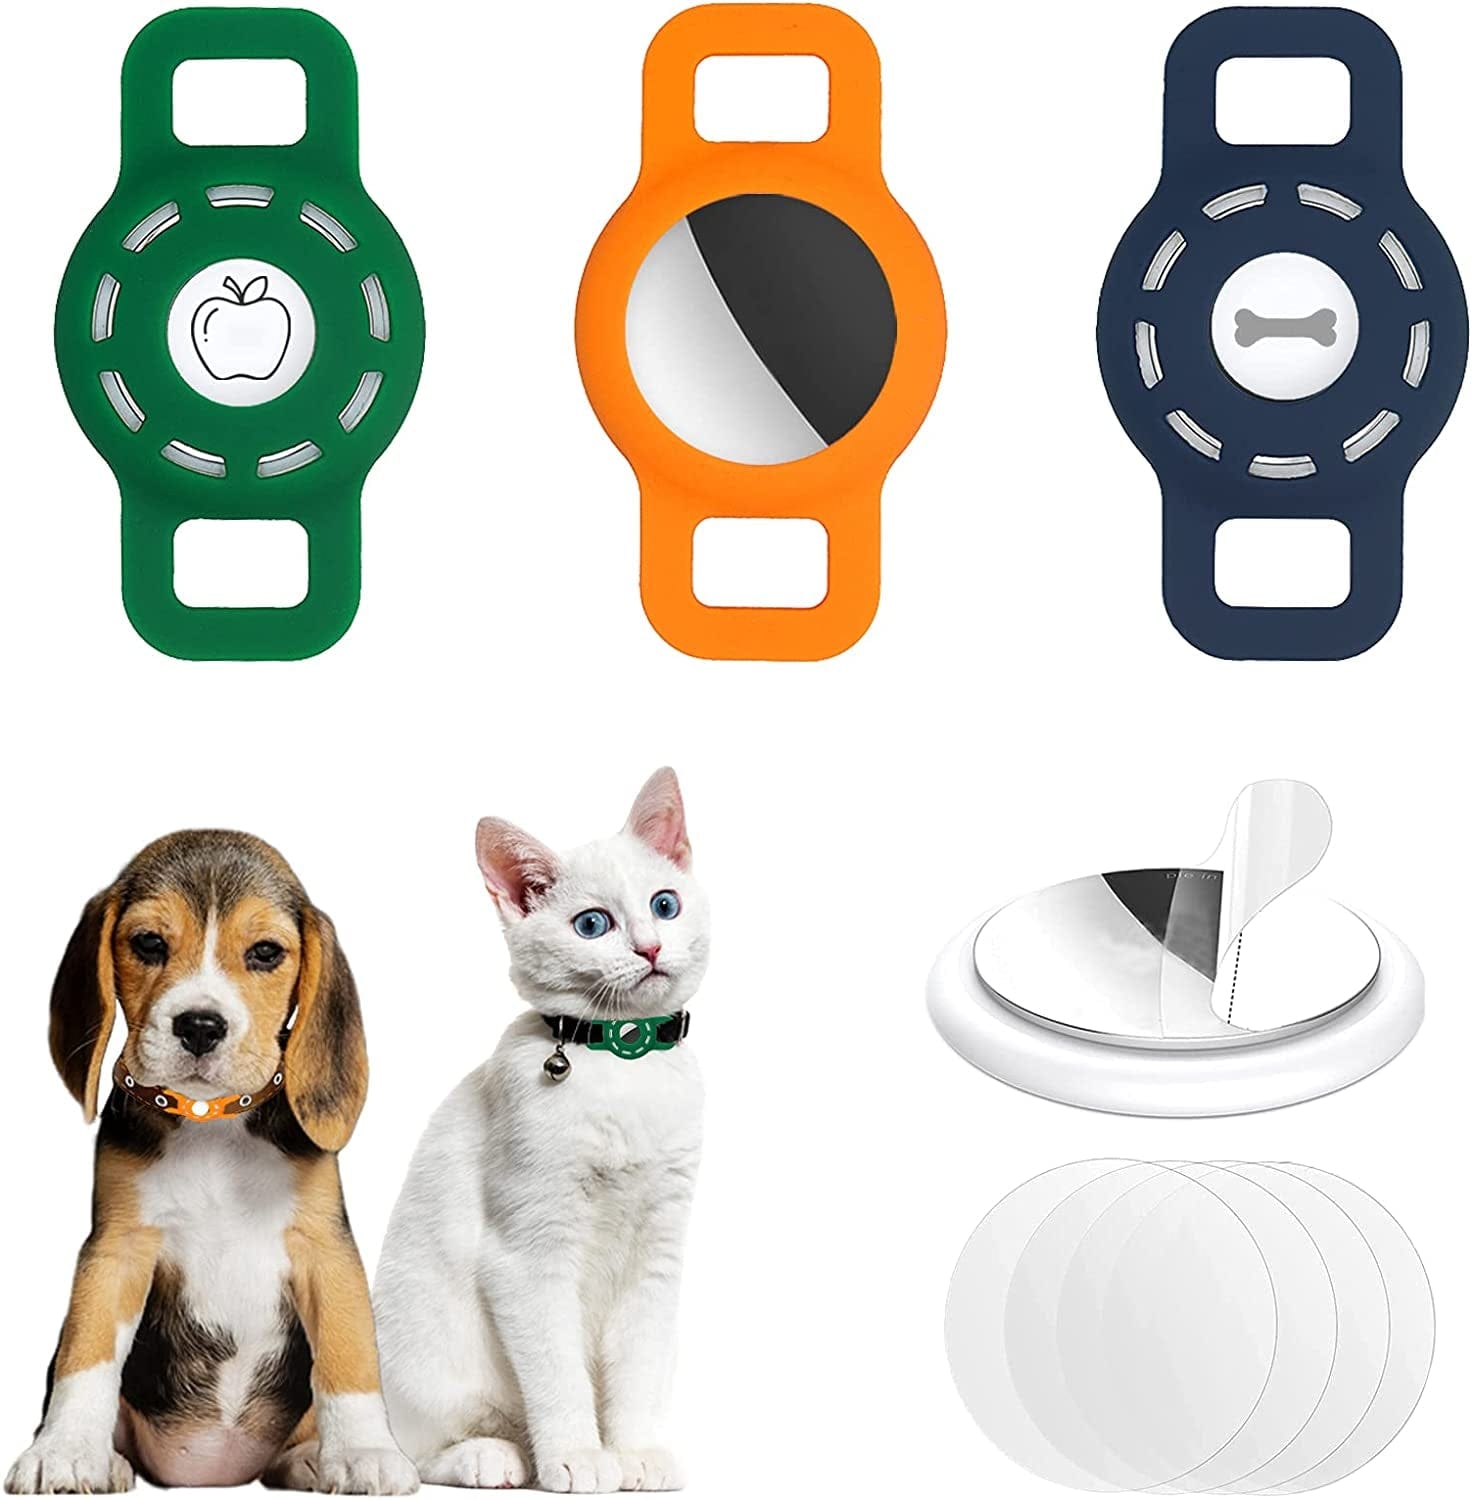 3-Pack Airtag Cat Collar Holder for Apple Airtag 2021, Silicone Airtag Protective Case for Puppy Collar, Anti-Lost Airtag Dog Collar Holder with Screen Protectors Electronics > GPS Accessories > GPS Cases Fretime Navy & Dark Green & Orange Suitable for collar up to 0.7 inch wide 